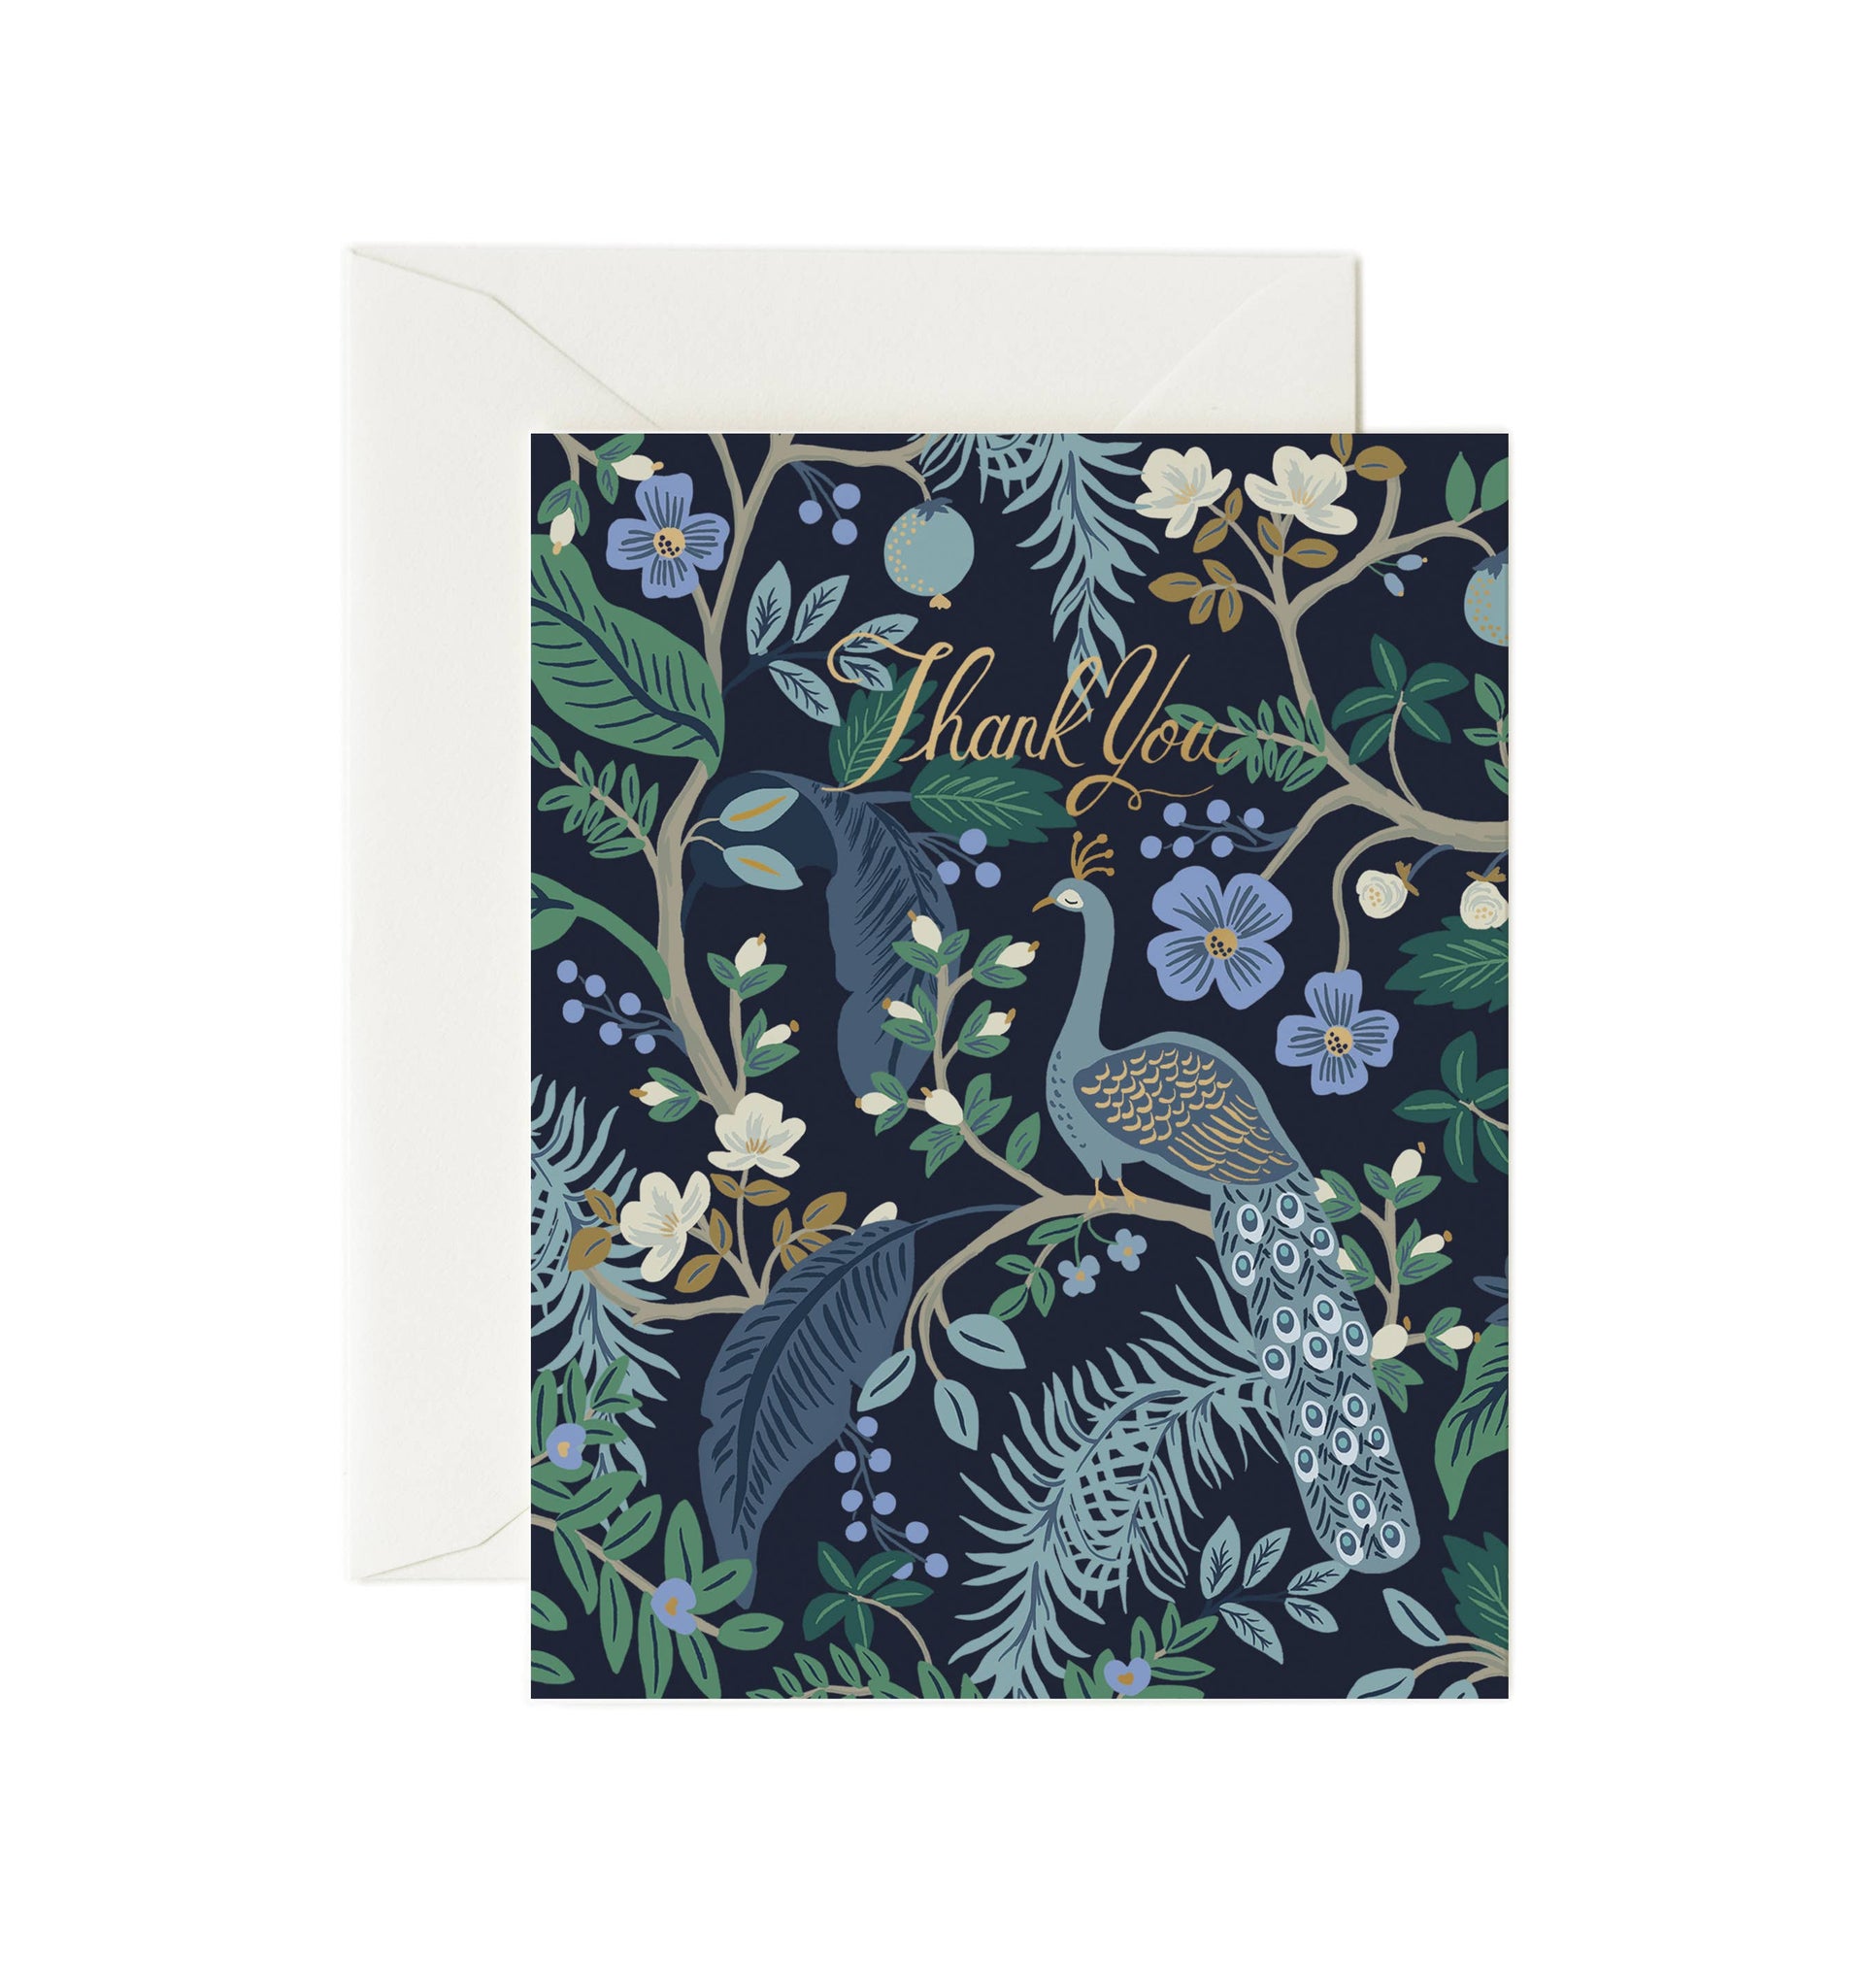 Boxed Set of Peacock Thank You Cards